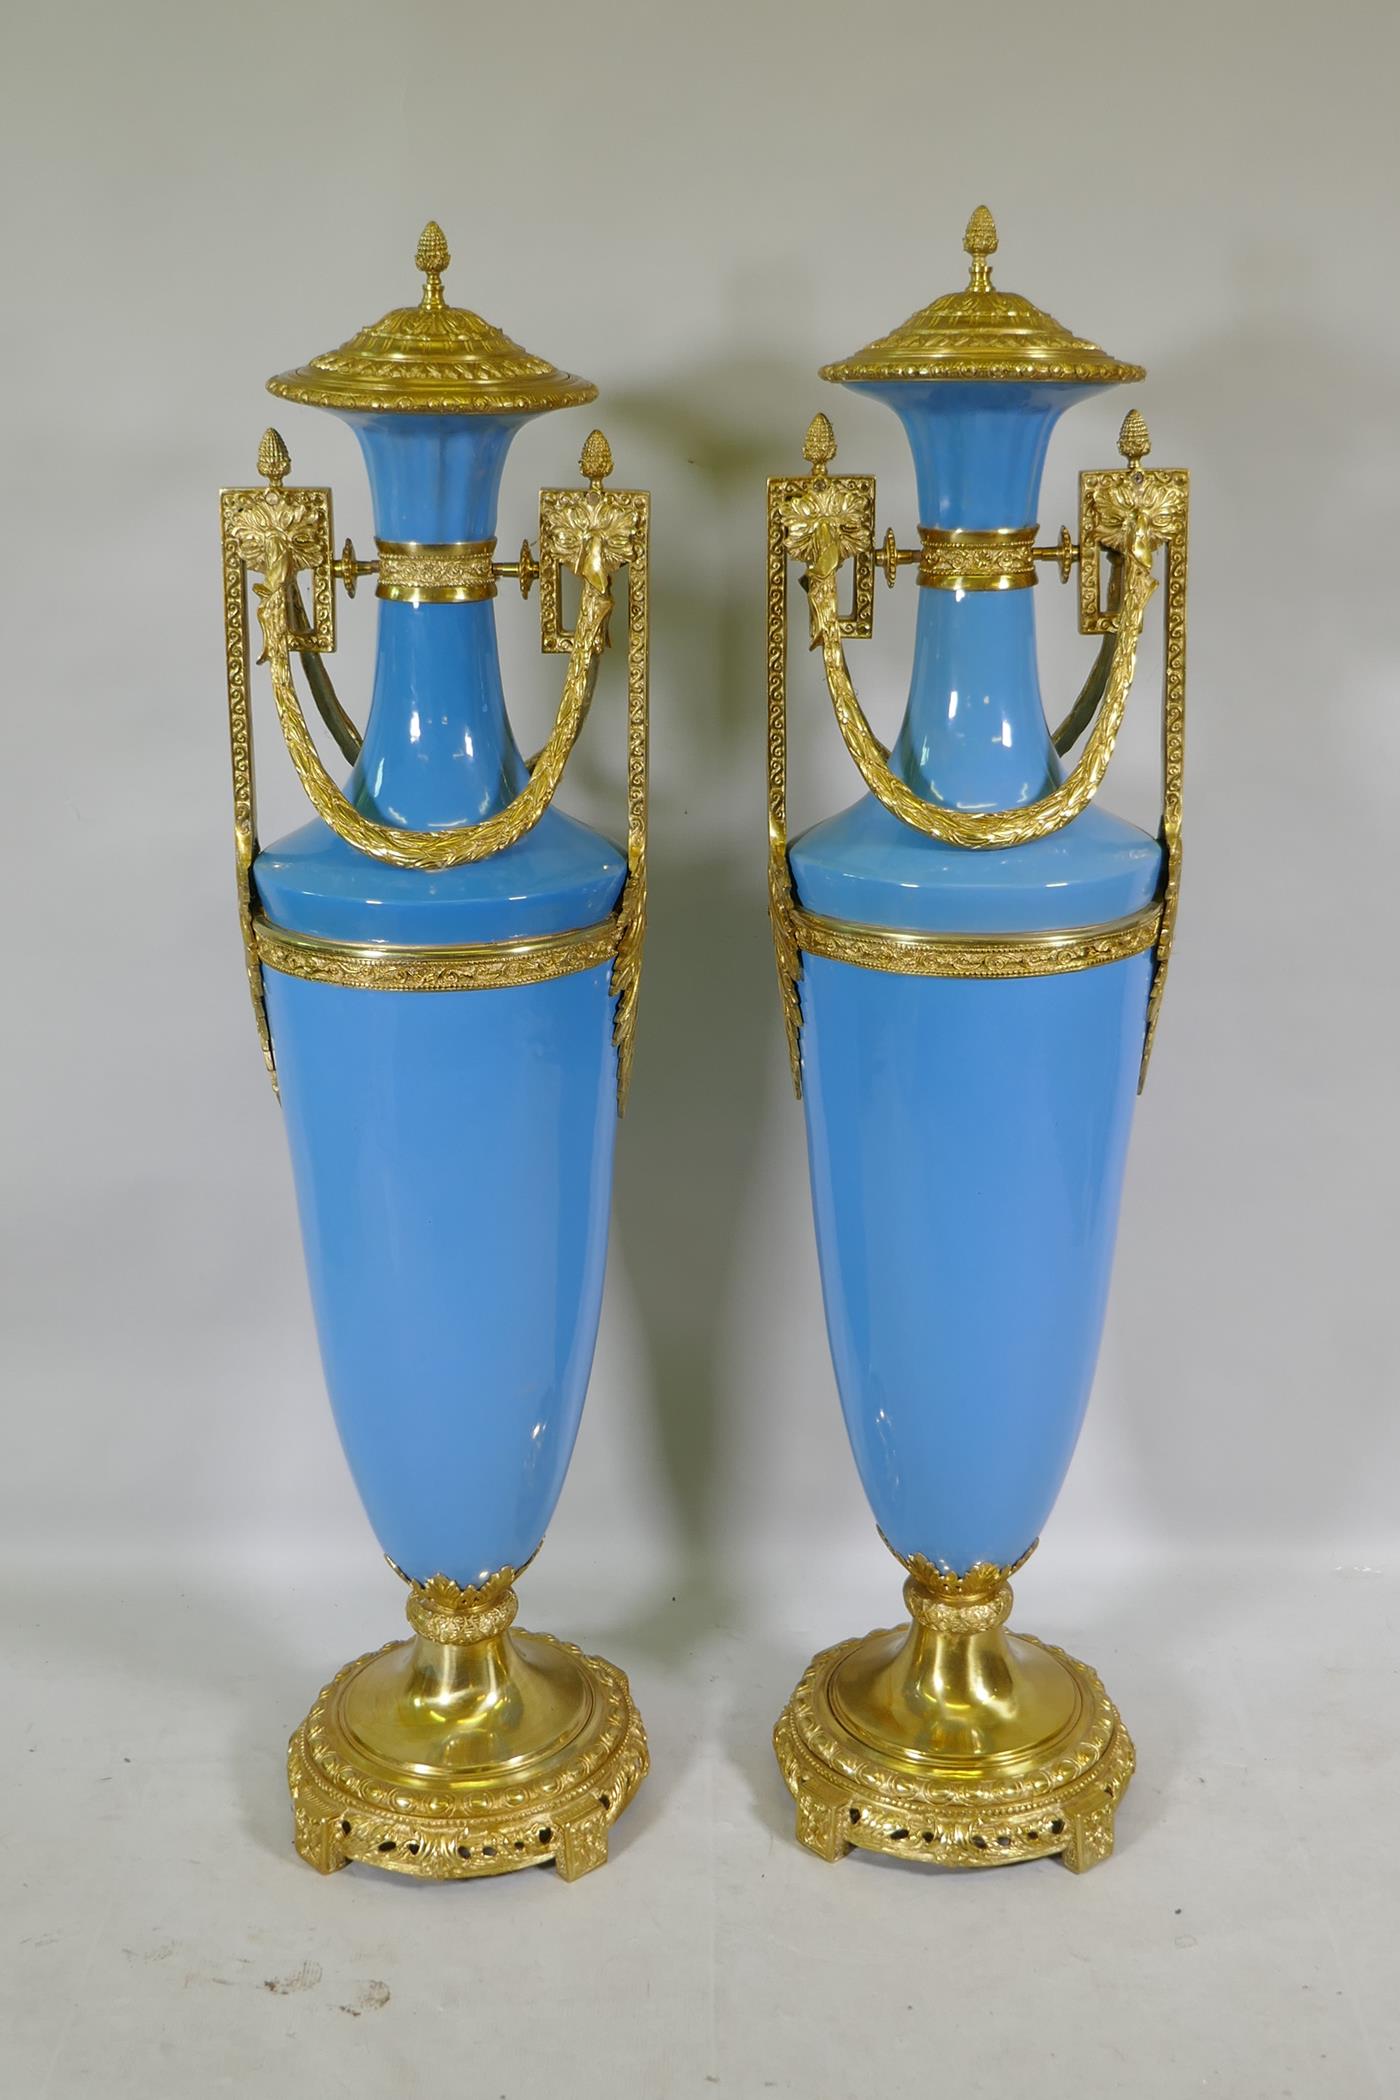 A large pair of Sevres blue style ceramic urns with ormolu mounts, 135cm high